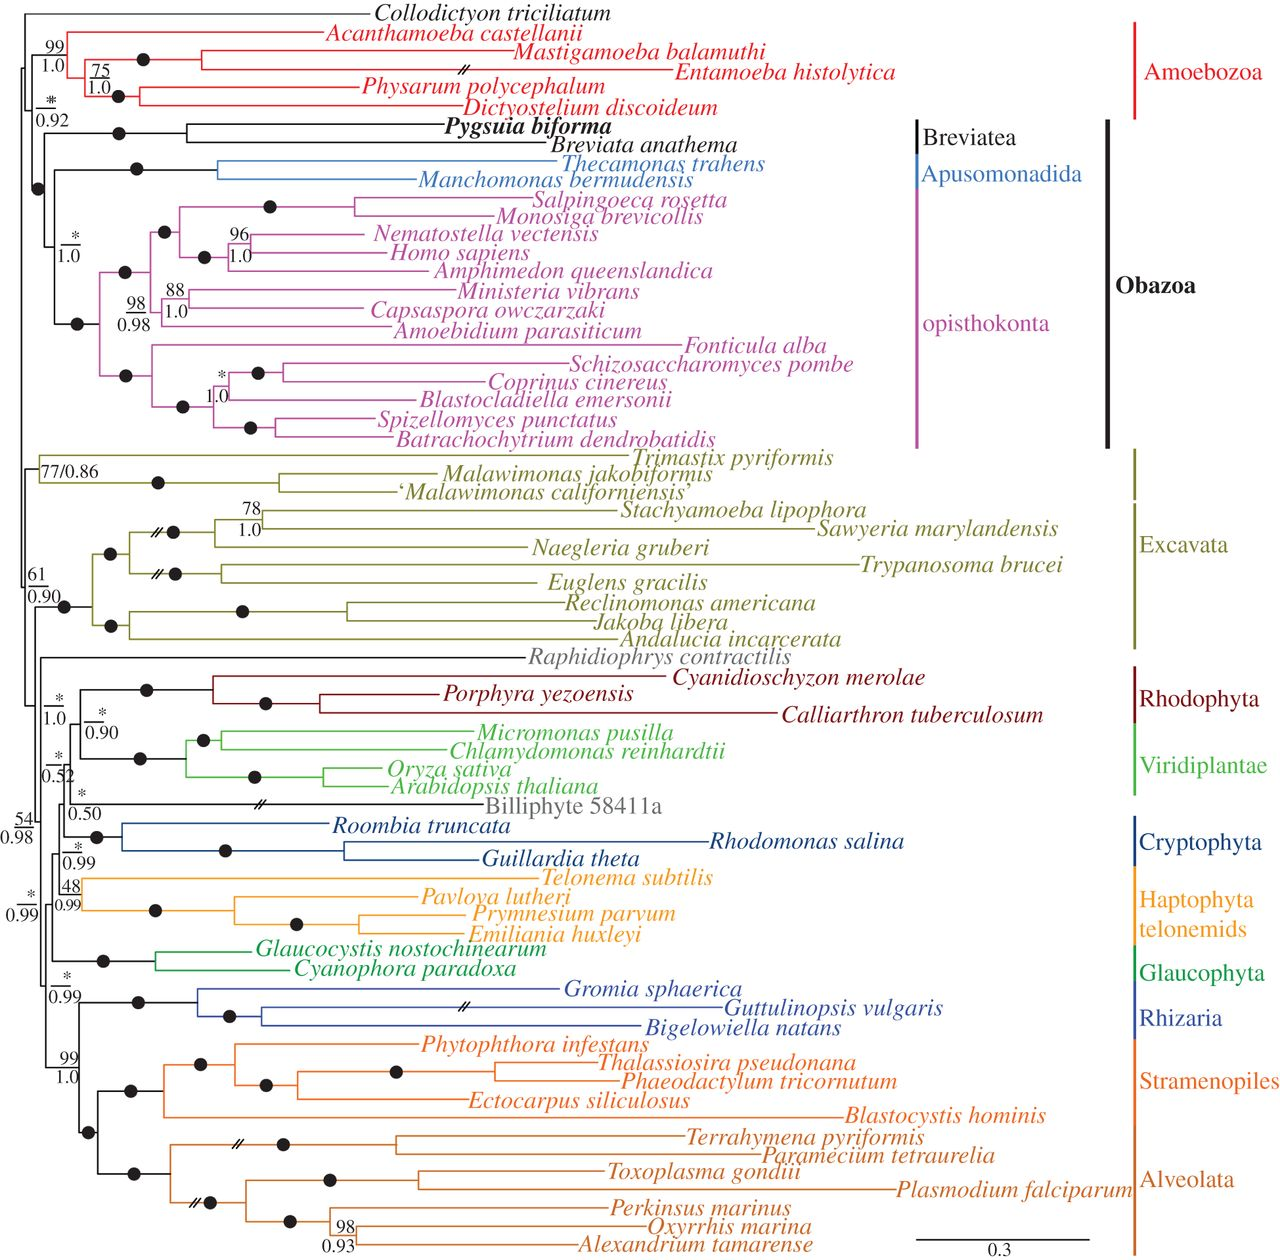 Putting orphan eukaryotic lineages in place 159